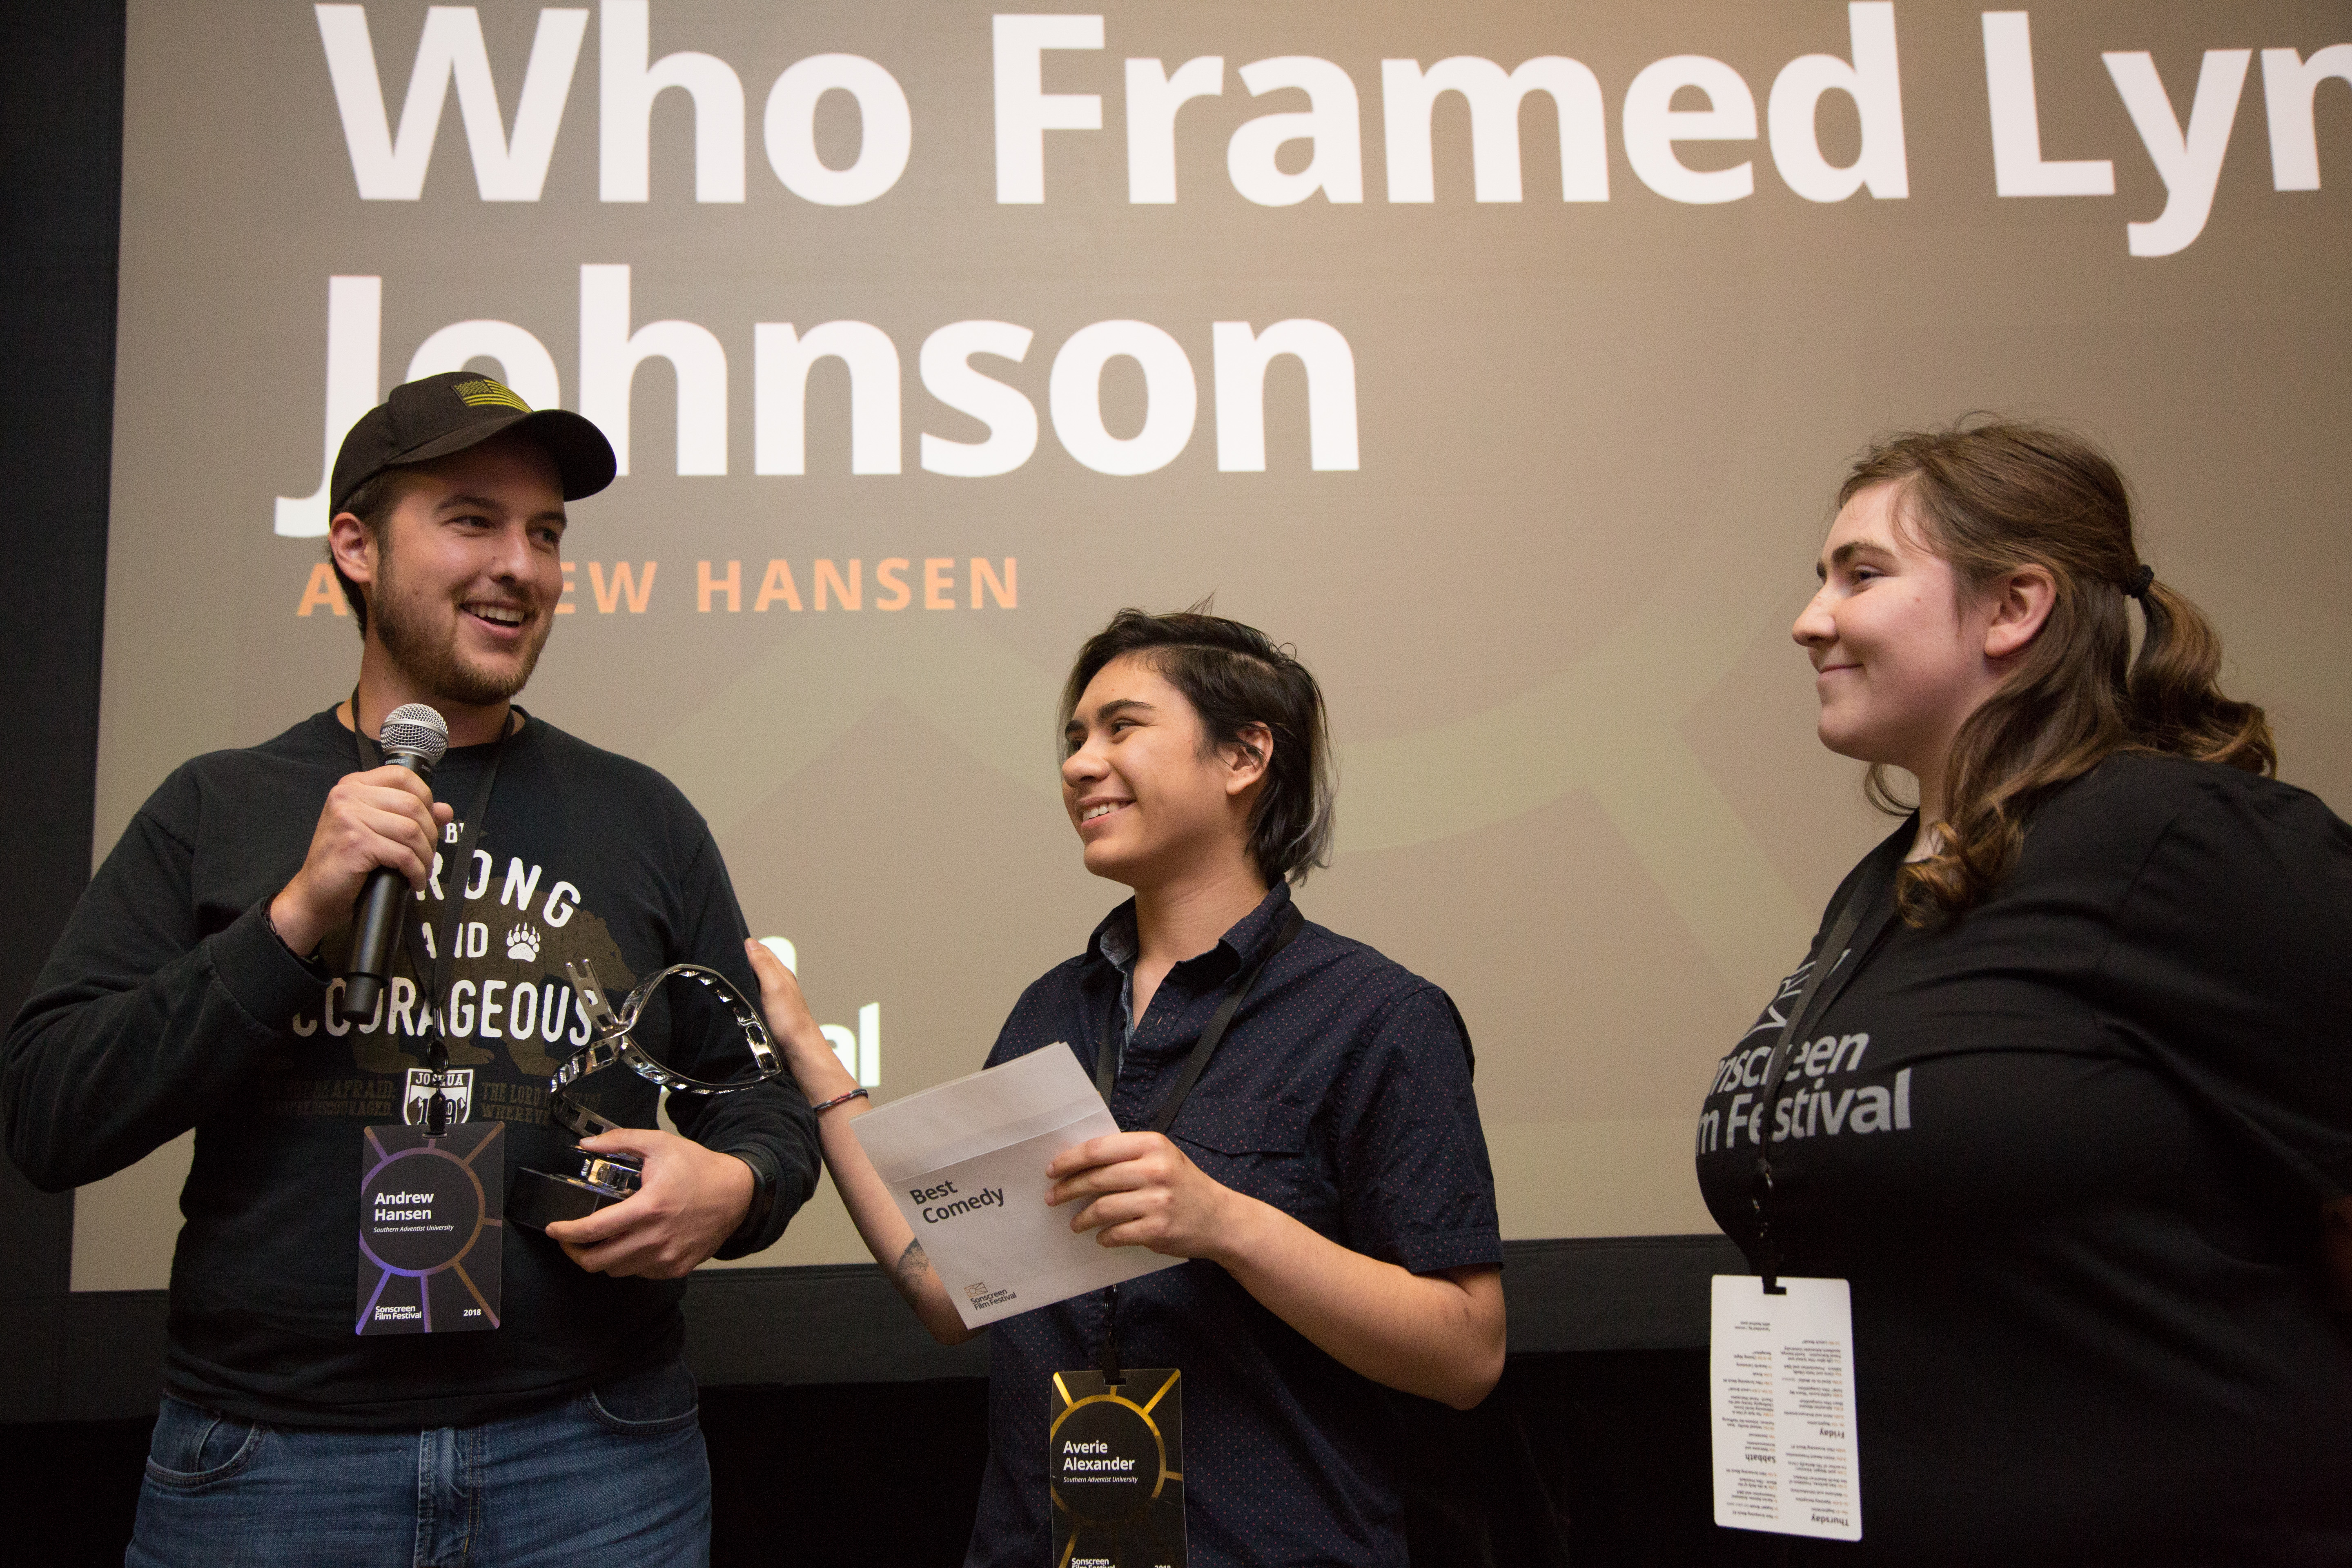 Andrew Hansen accepts the award for Best Comedy Short with his film "Who Framed Lyndon Johnson?" 